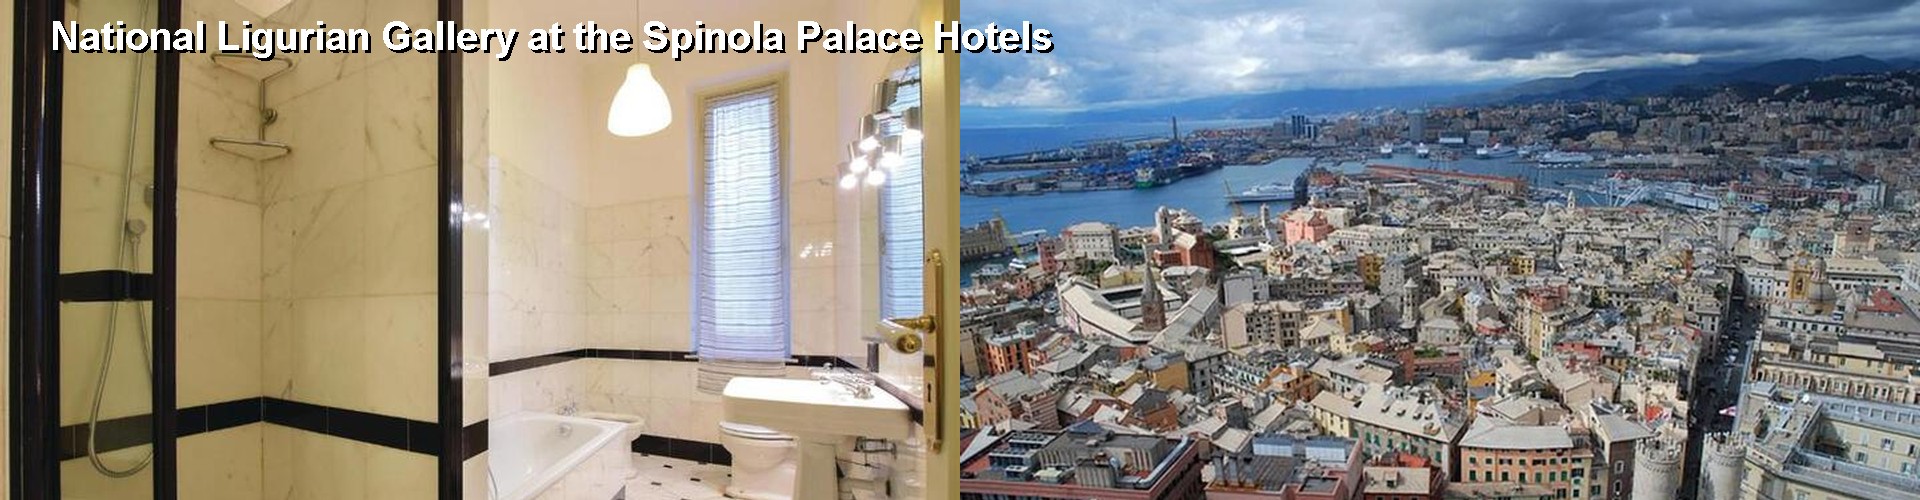 5 Best Hotels near National Ligurian Gallery at the Spinola Palace